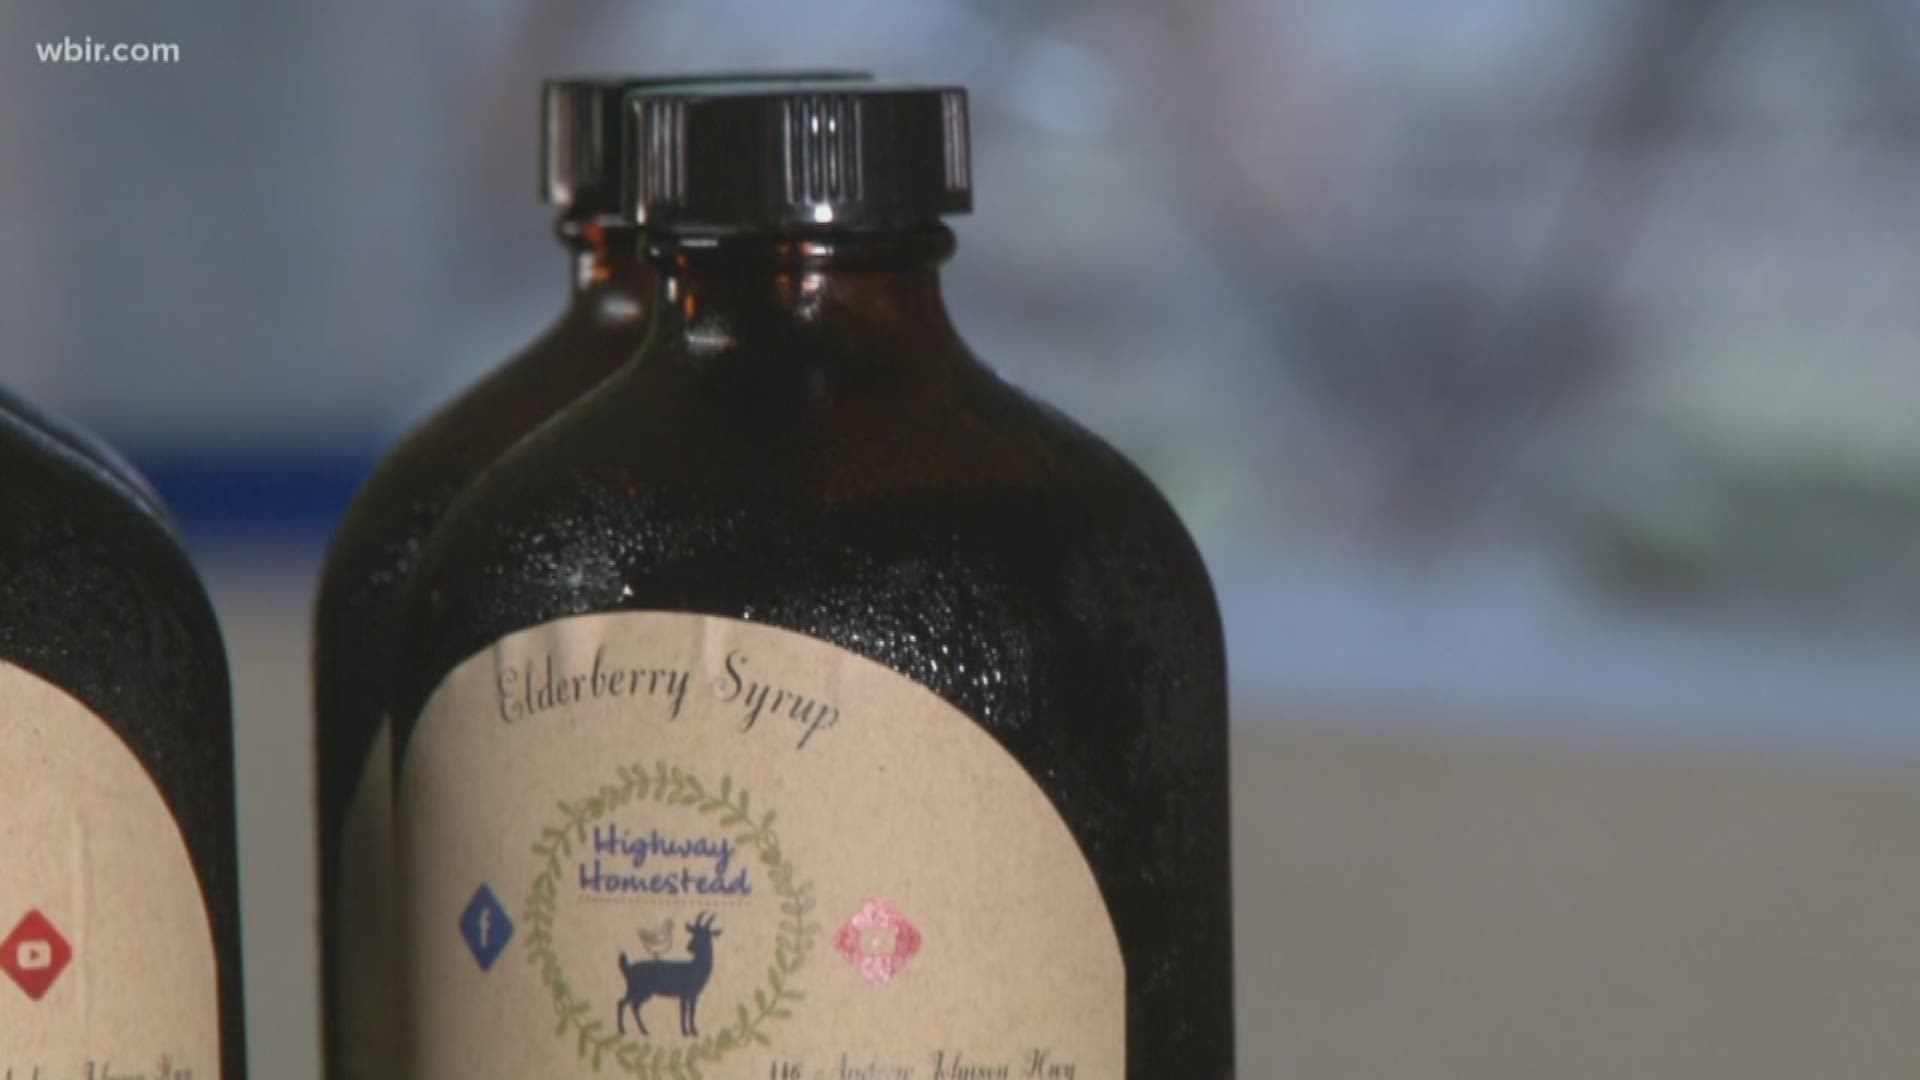 To fight the flu and colds this season, many are turning to an old trick: elderberry syrup.